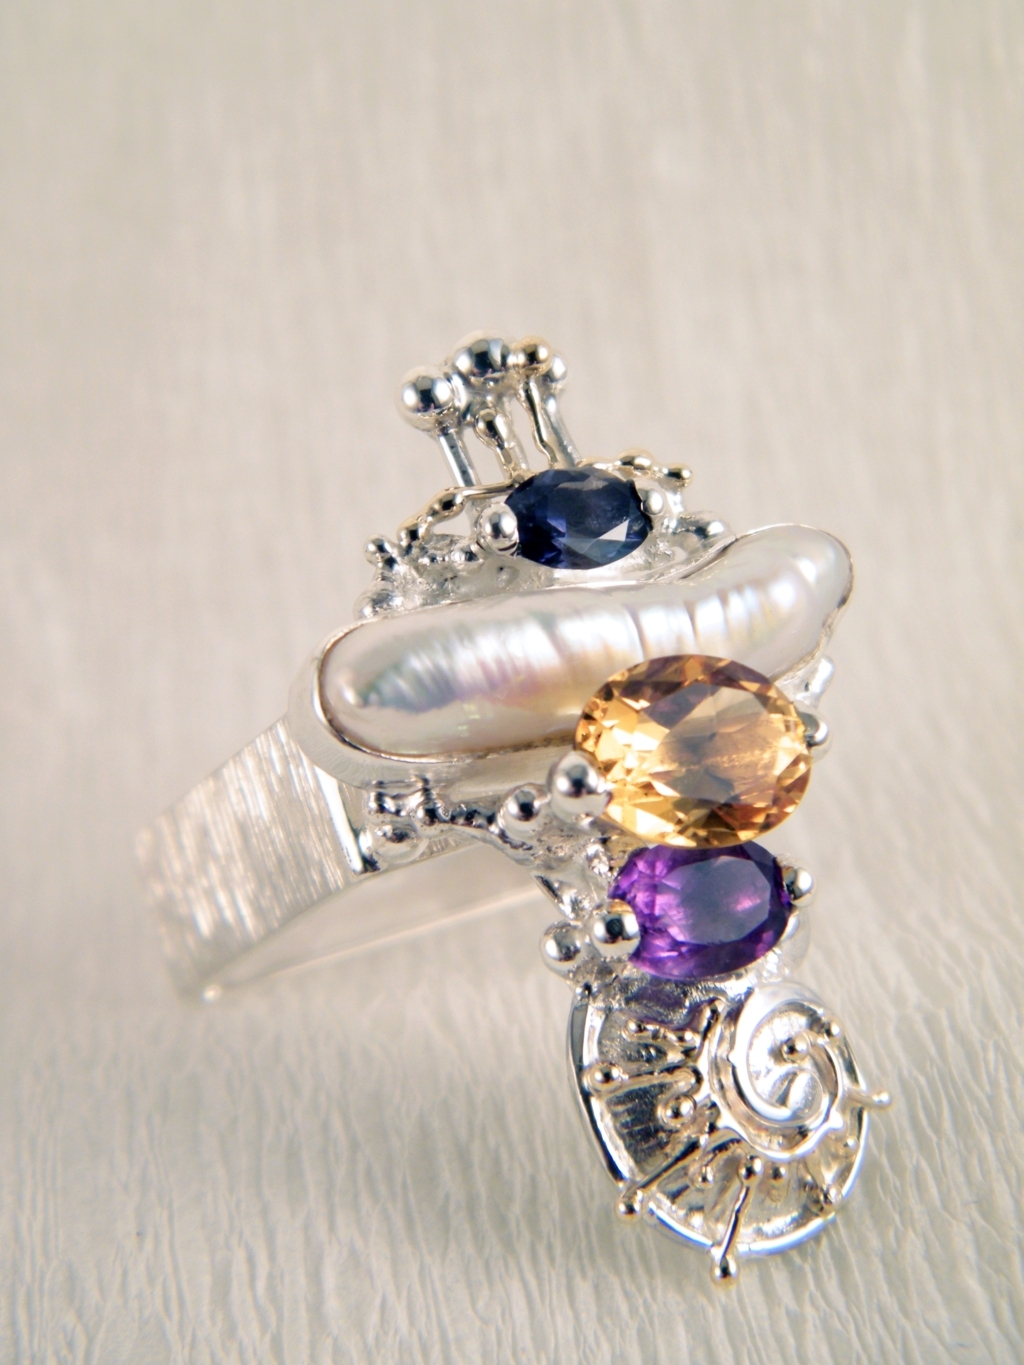 one of a kind handcrafted gregory pyra piro sqaure ring 1725, one of a kind jewellery, handmade jewelry with natural pearls and stones, fine craft gallery handcrafted jewellery, mixed metal handcrafted jewelelry